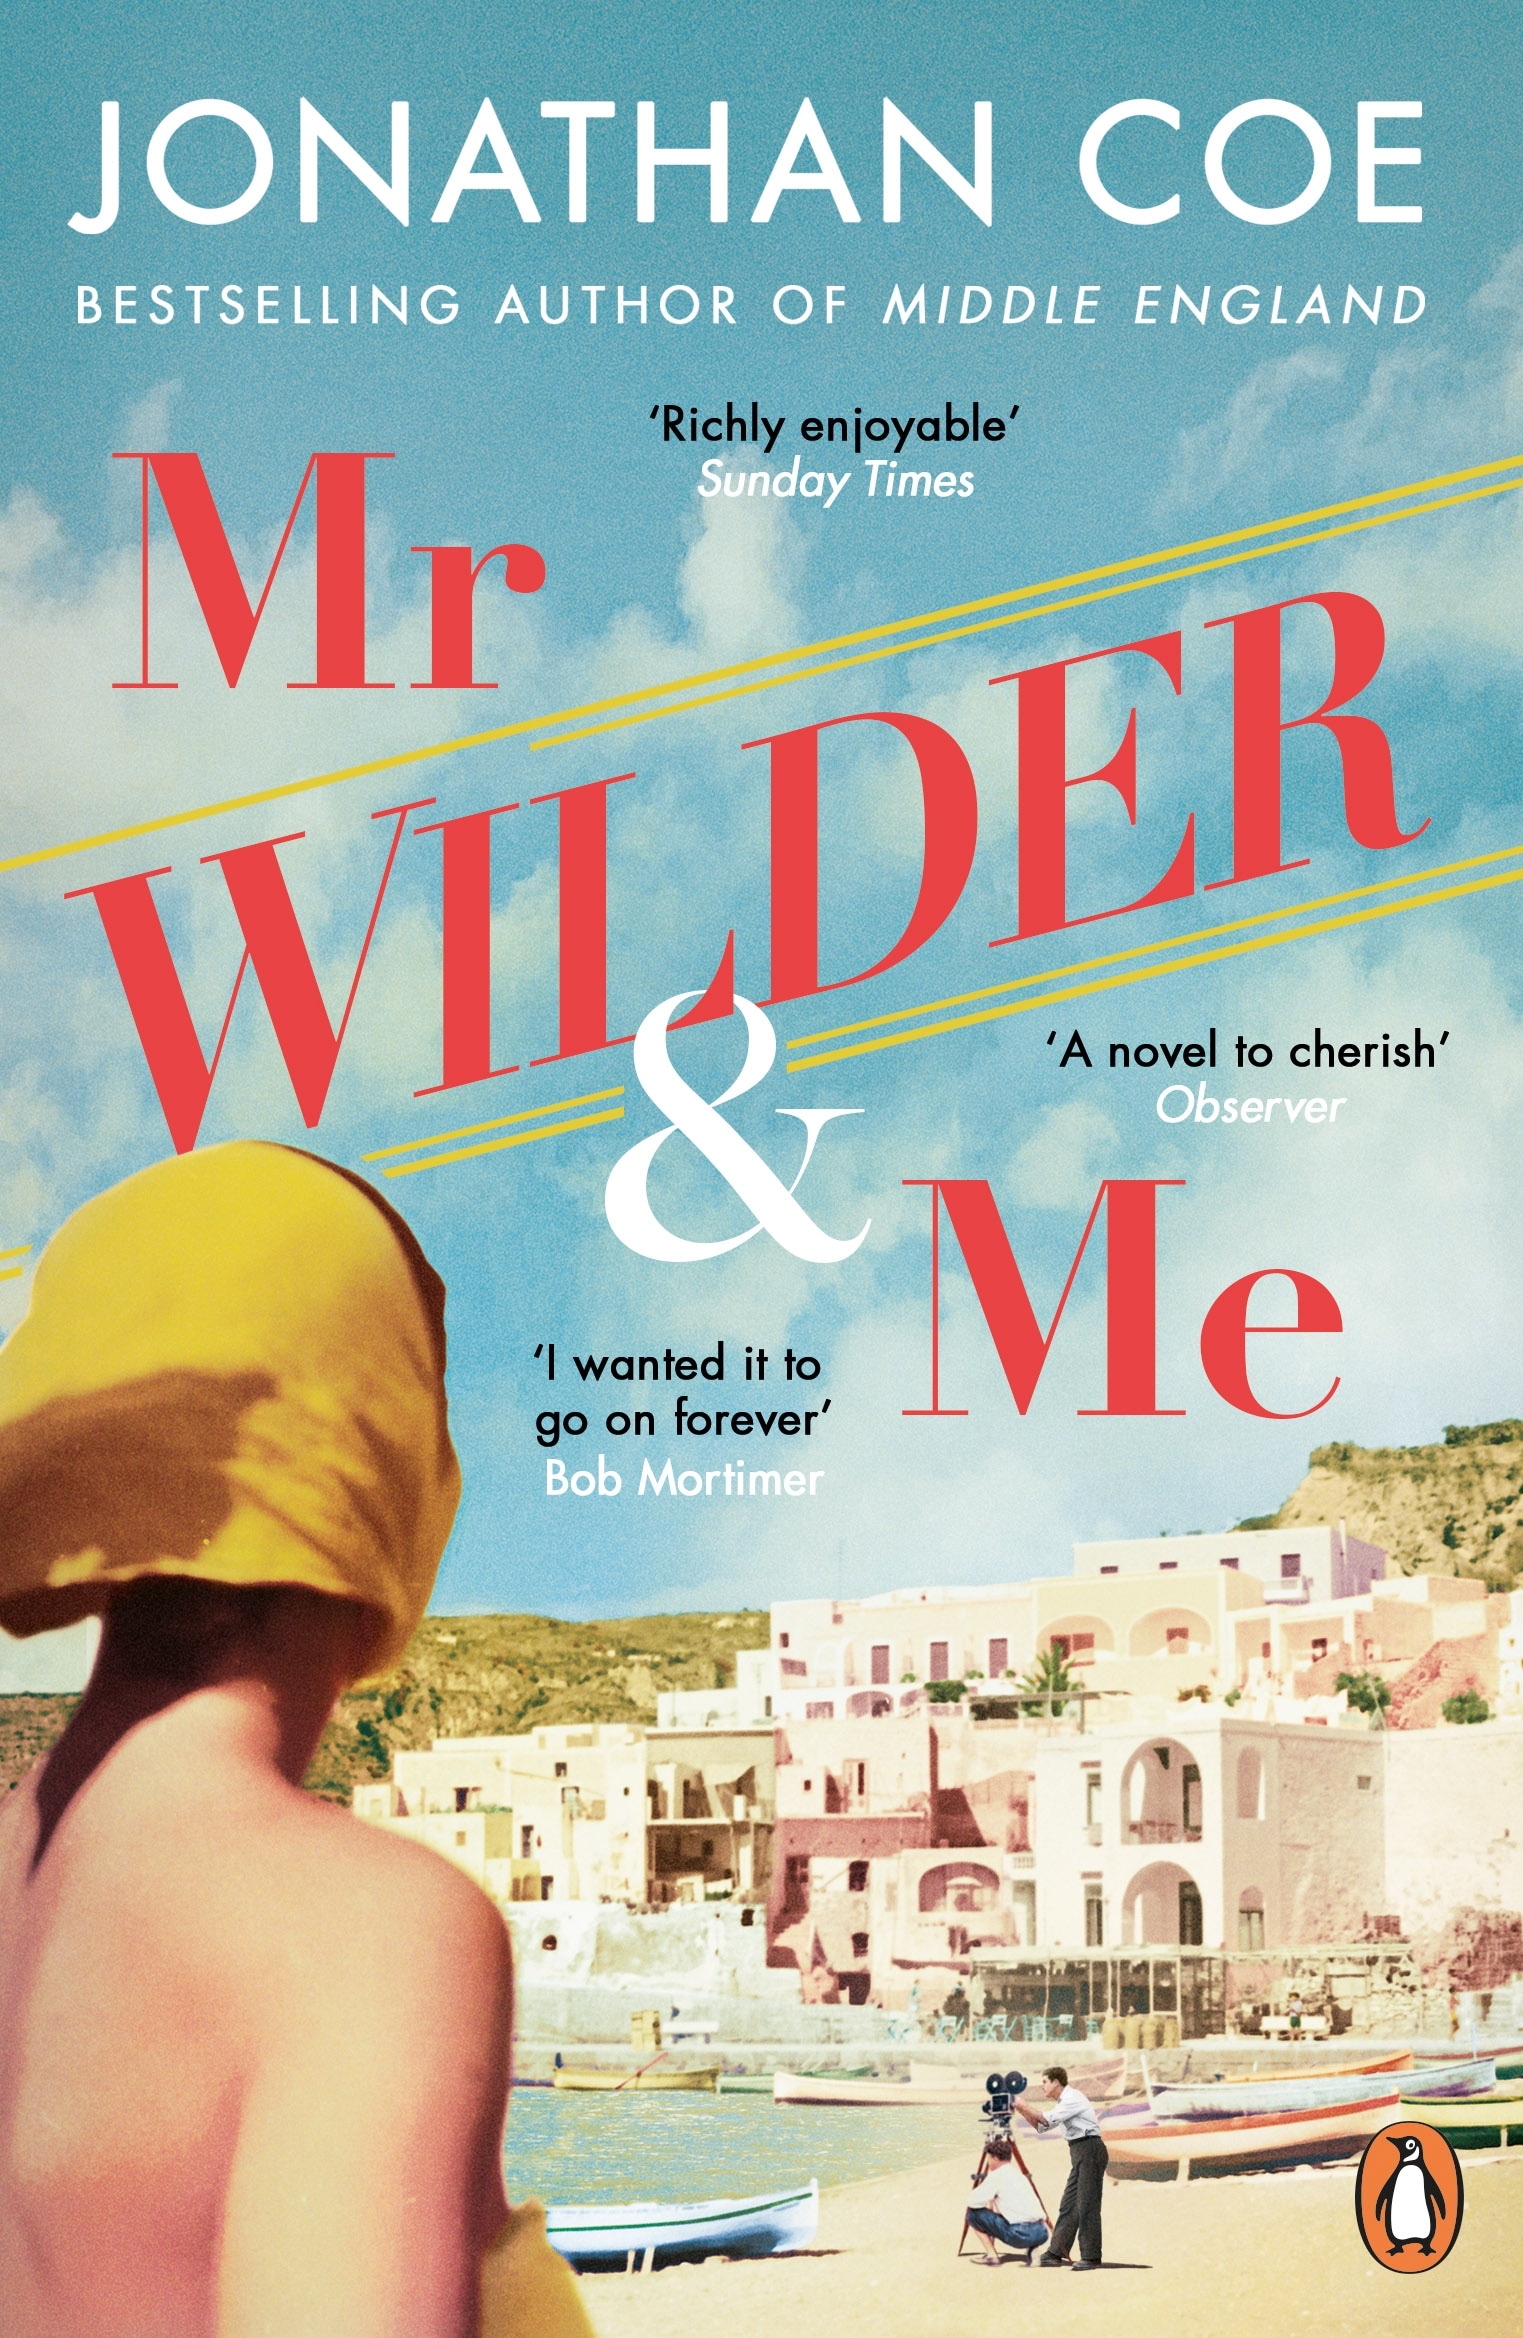 Book “Mr Wilder and Me” by Jonathan Coe — July 1, 2021